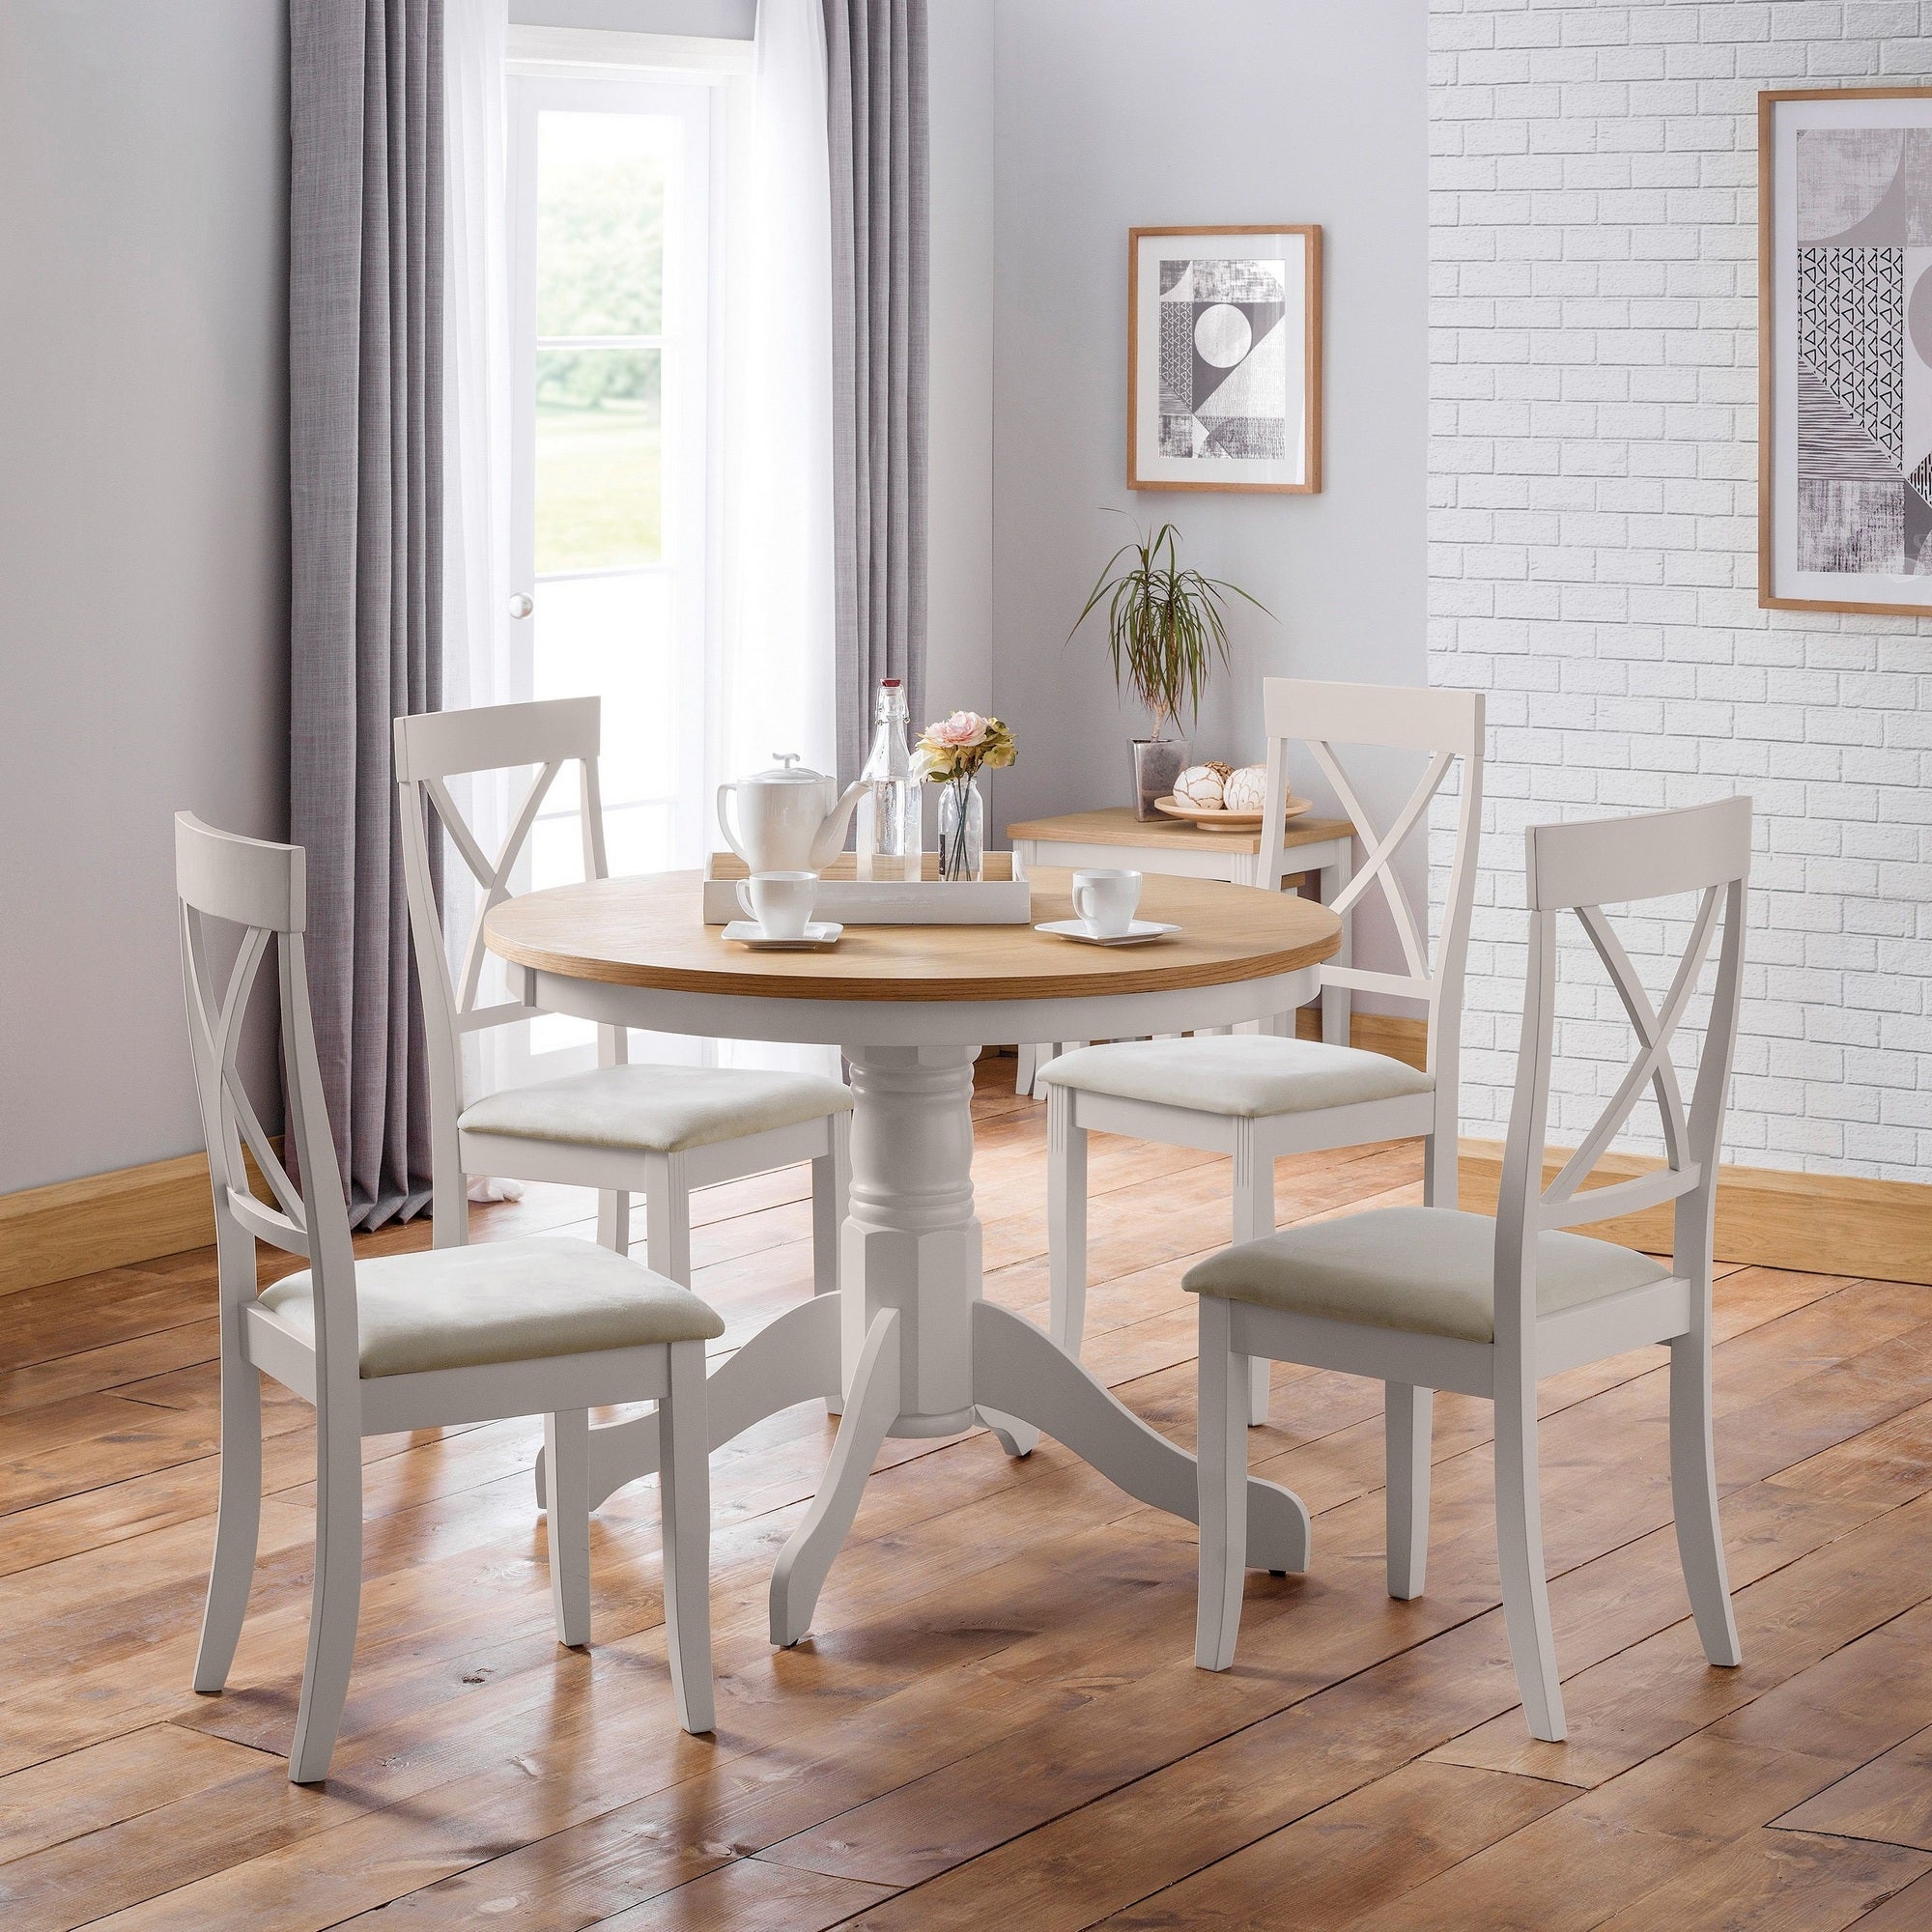 Davenport Round Dining Table with 4 Chairs